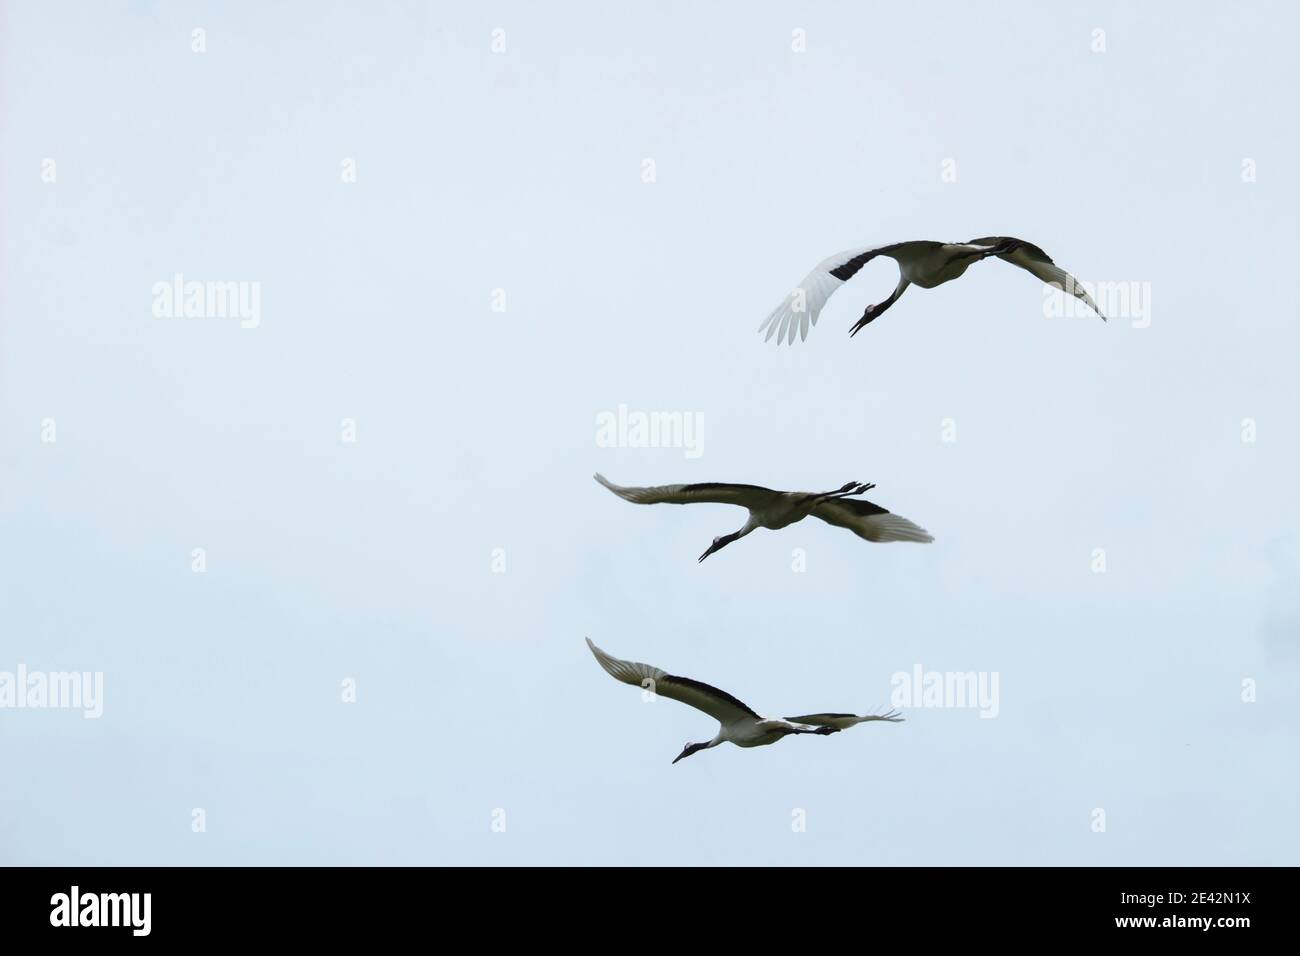 Back view of cranes flying in formation Stock Photo